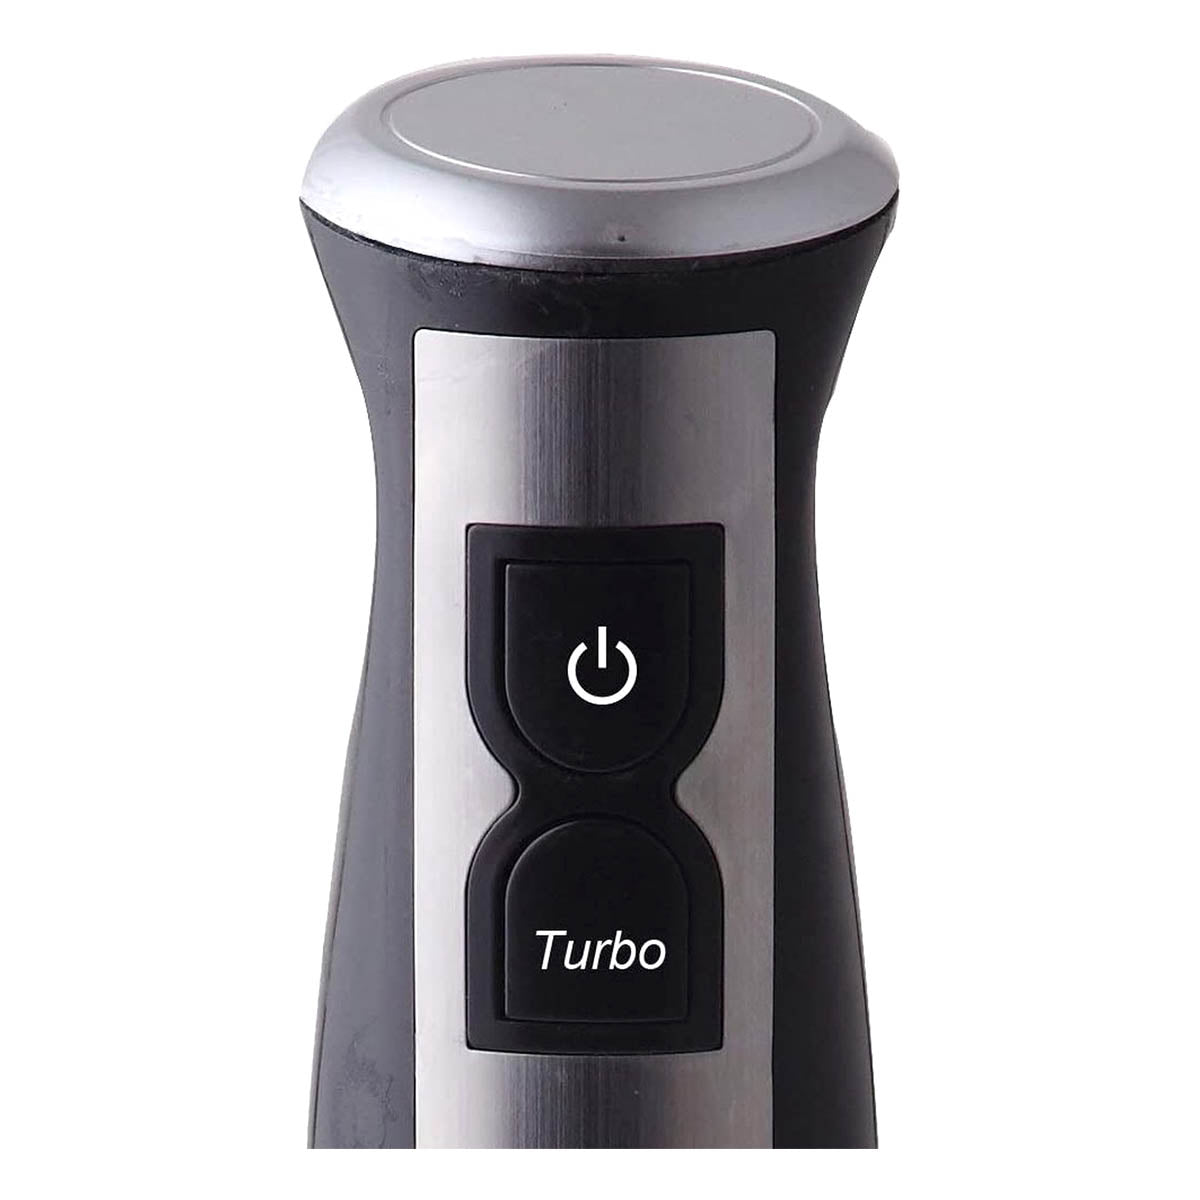 <tc>Ariko</tc> Turbo Hand Blender 600W - Black - including mixing and measuring reservoir - stainless steel blade - 2 speeds - easy to clean